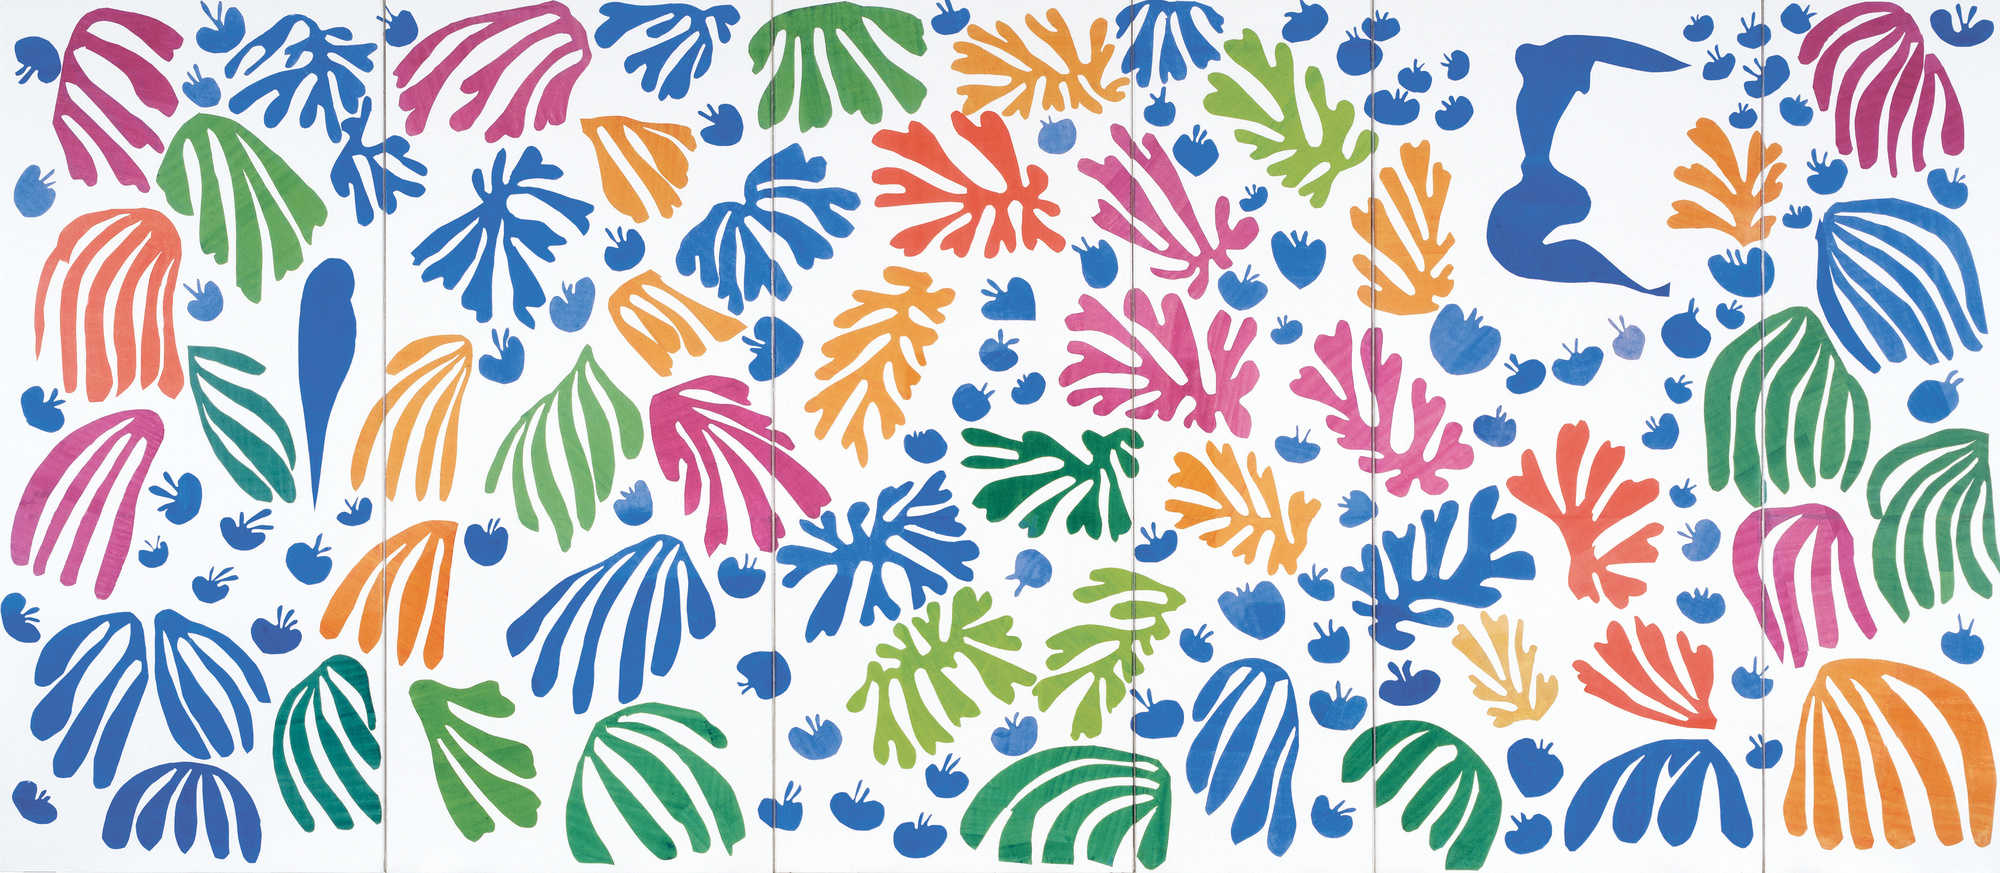 Matisse Cut outs